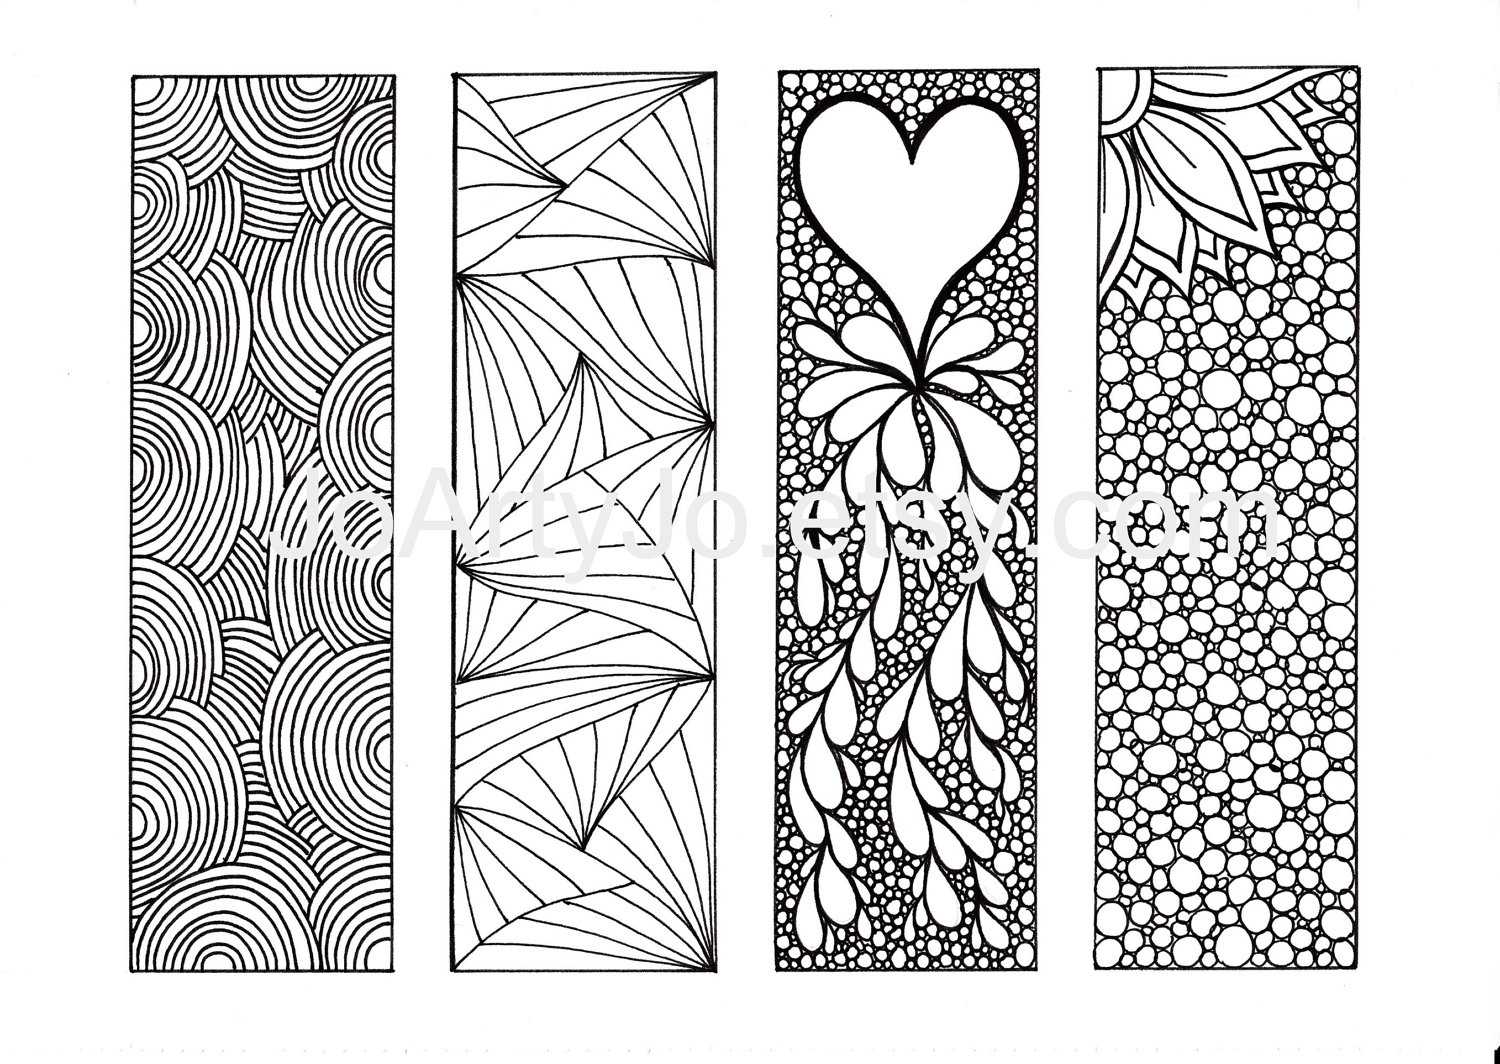 Coloring Pages : Coloring Pages Free Bookmarks To Color For For Free Blank Bookmark Templates To Print